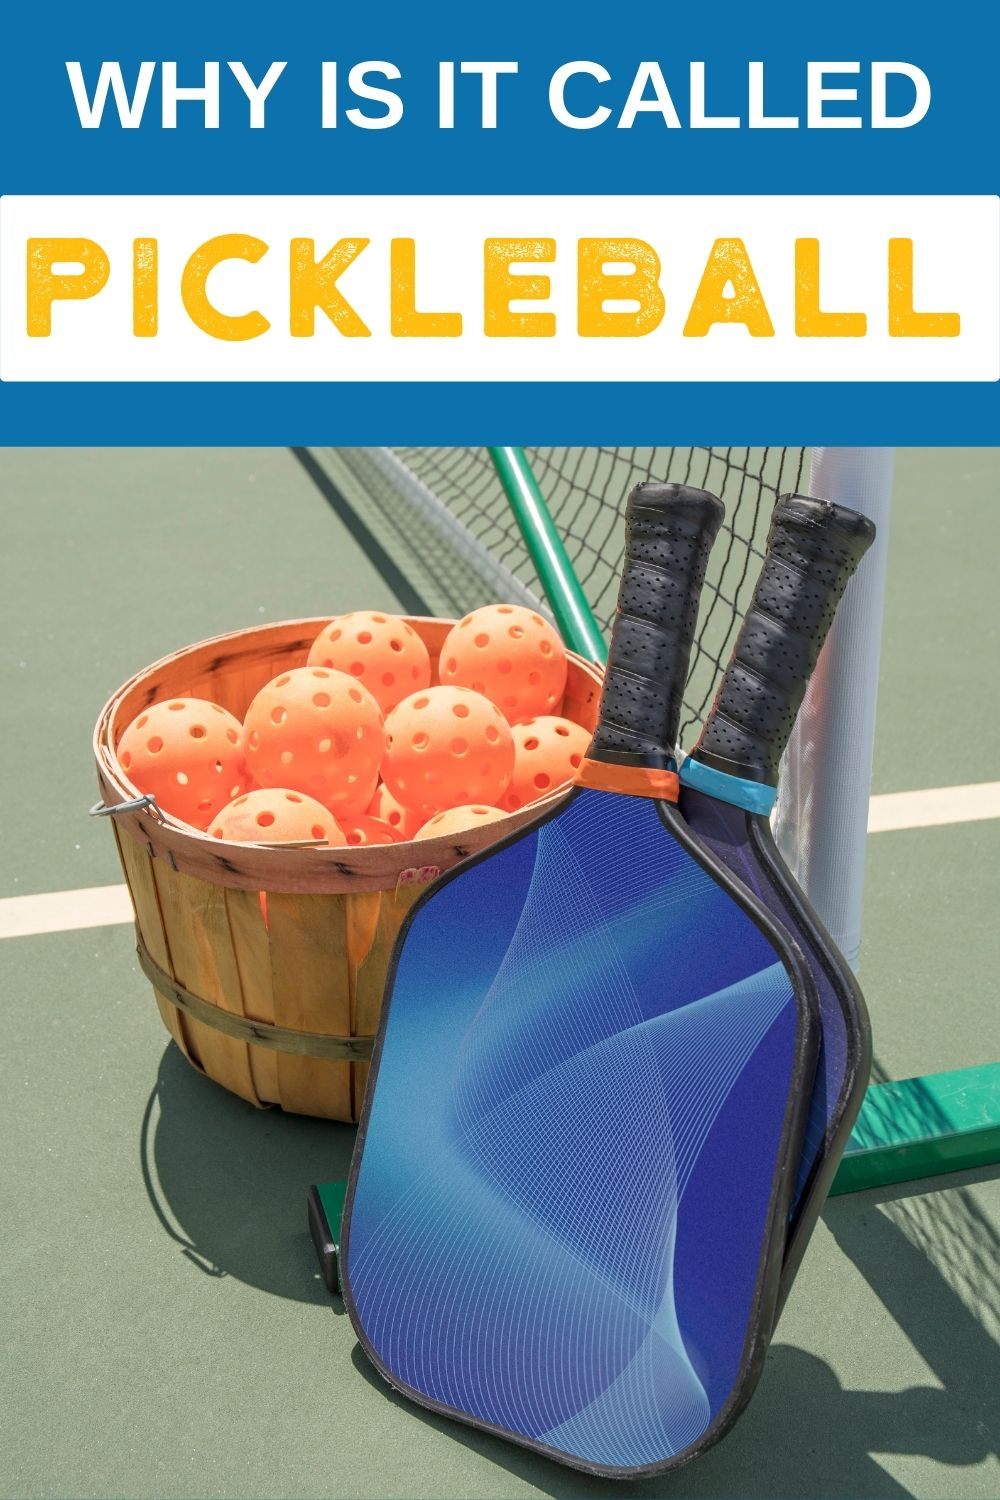 hero image of pickleballs in basket with paddles leaning against net with words why is it called pickleball